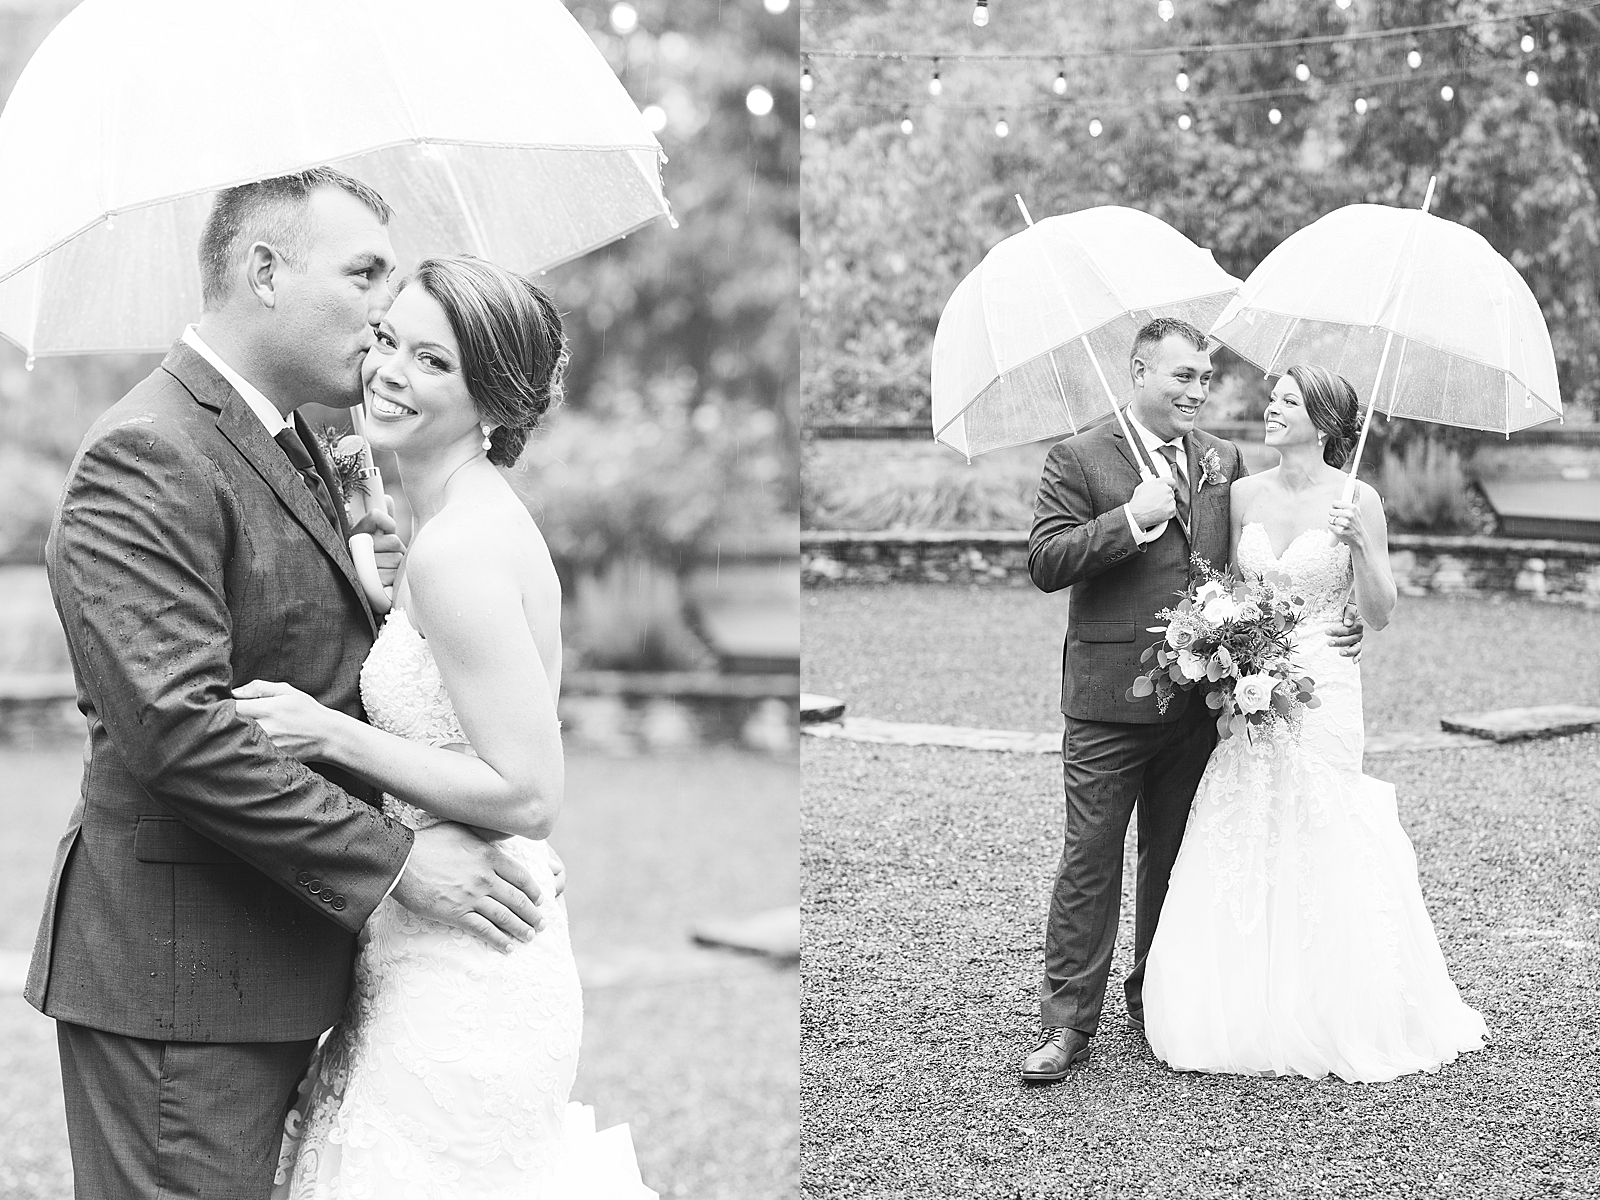 The Hackney Warehouse Black and White of Couple Under Umbrellas In The Rain Photos